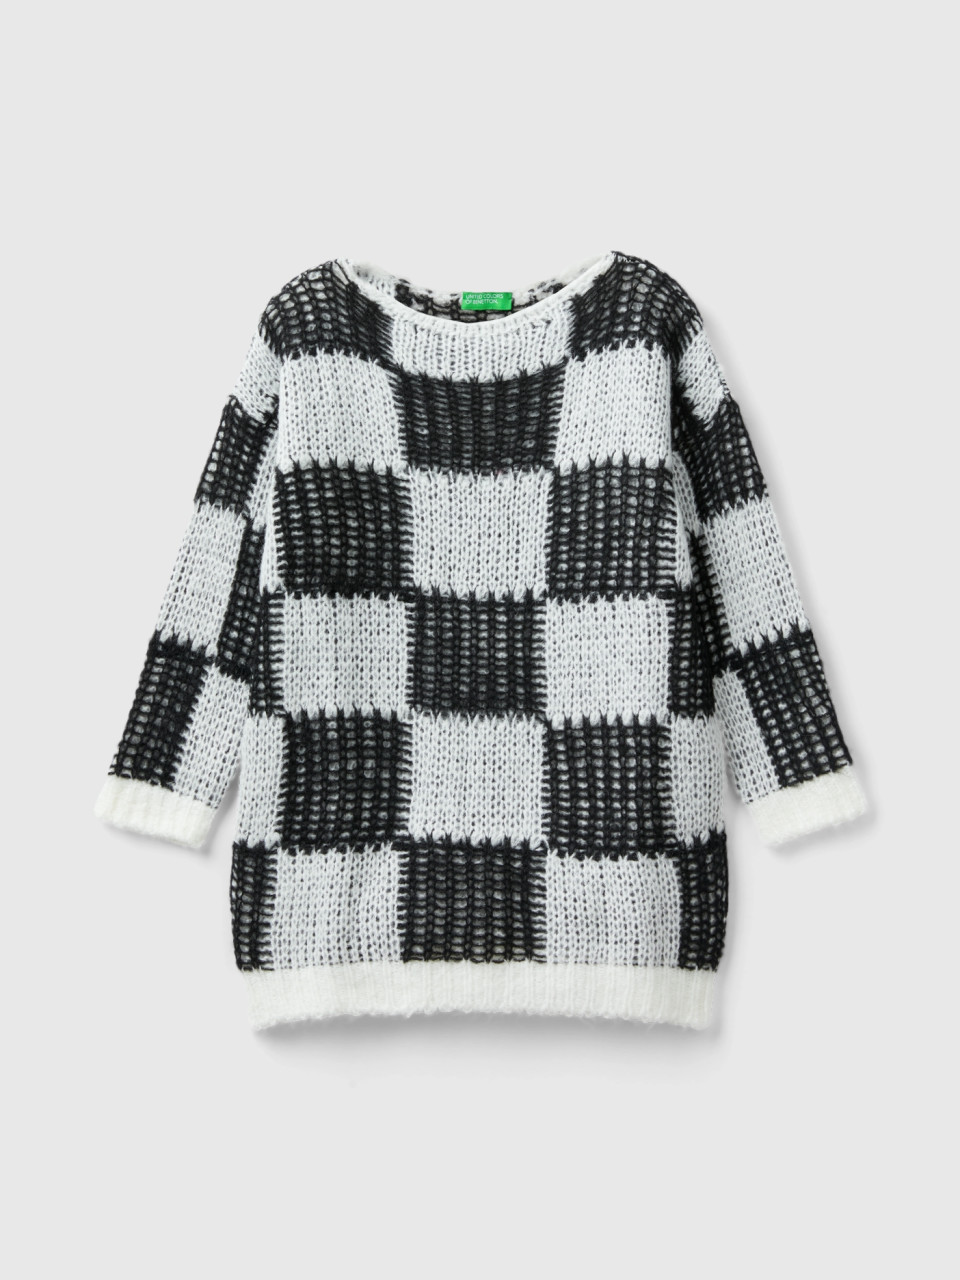 Benetton, Oversized Fit Check Sweater, Multi-color, Kids